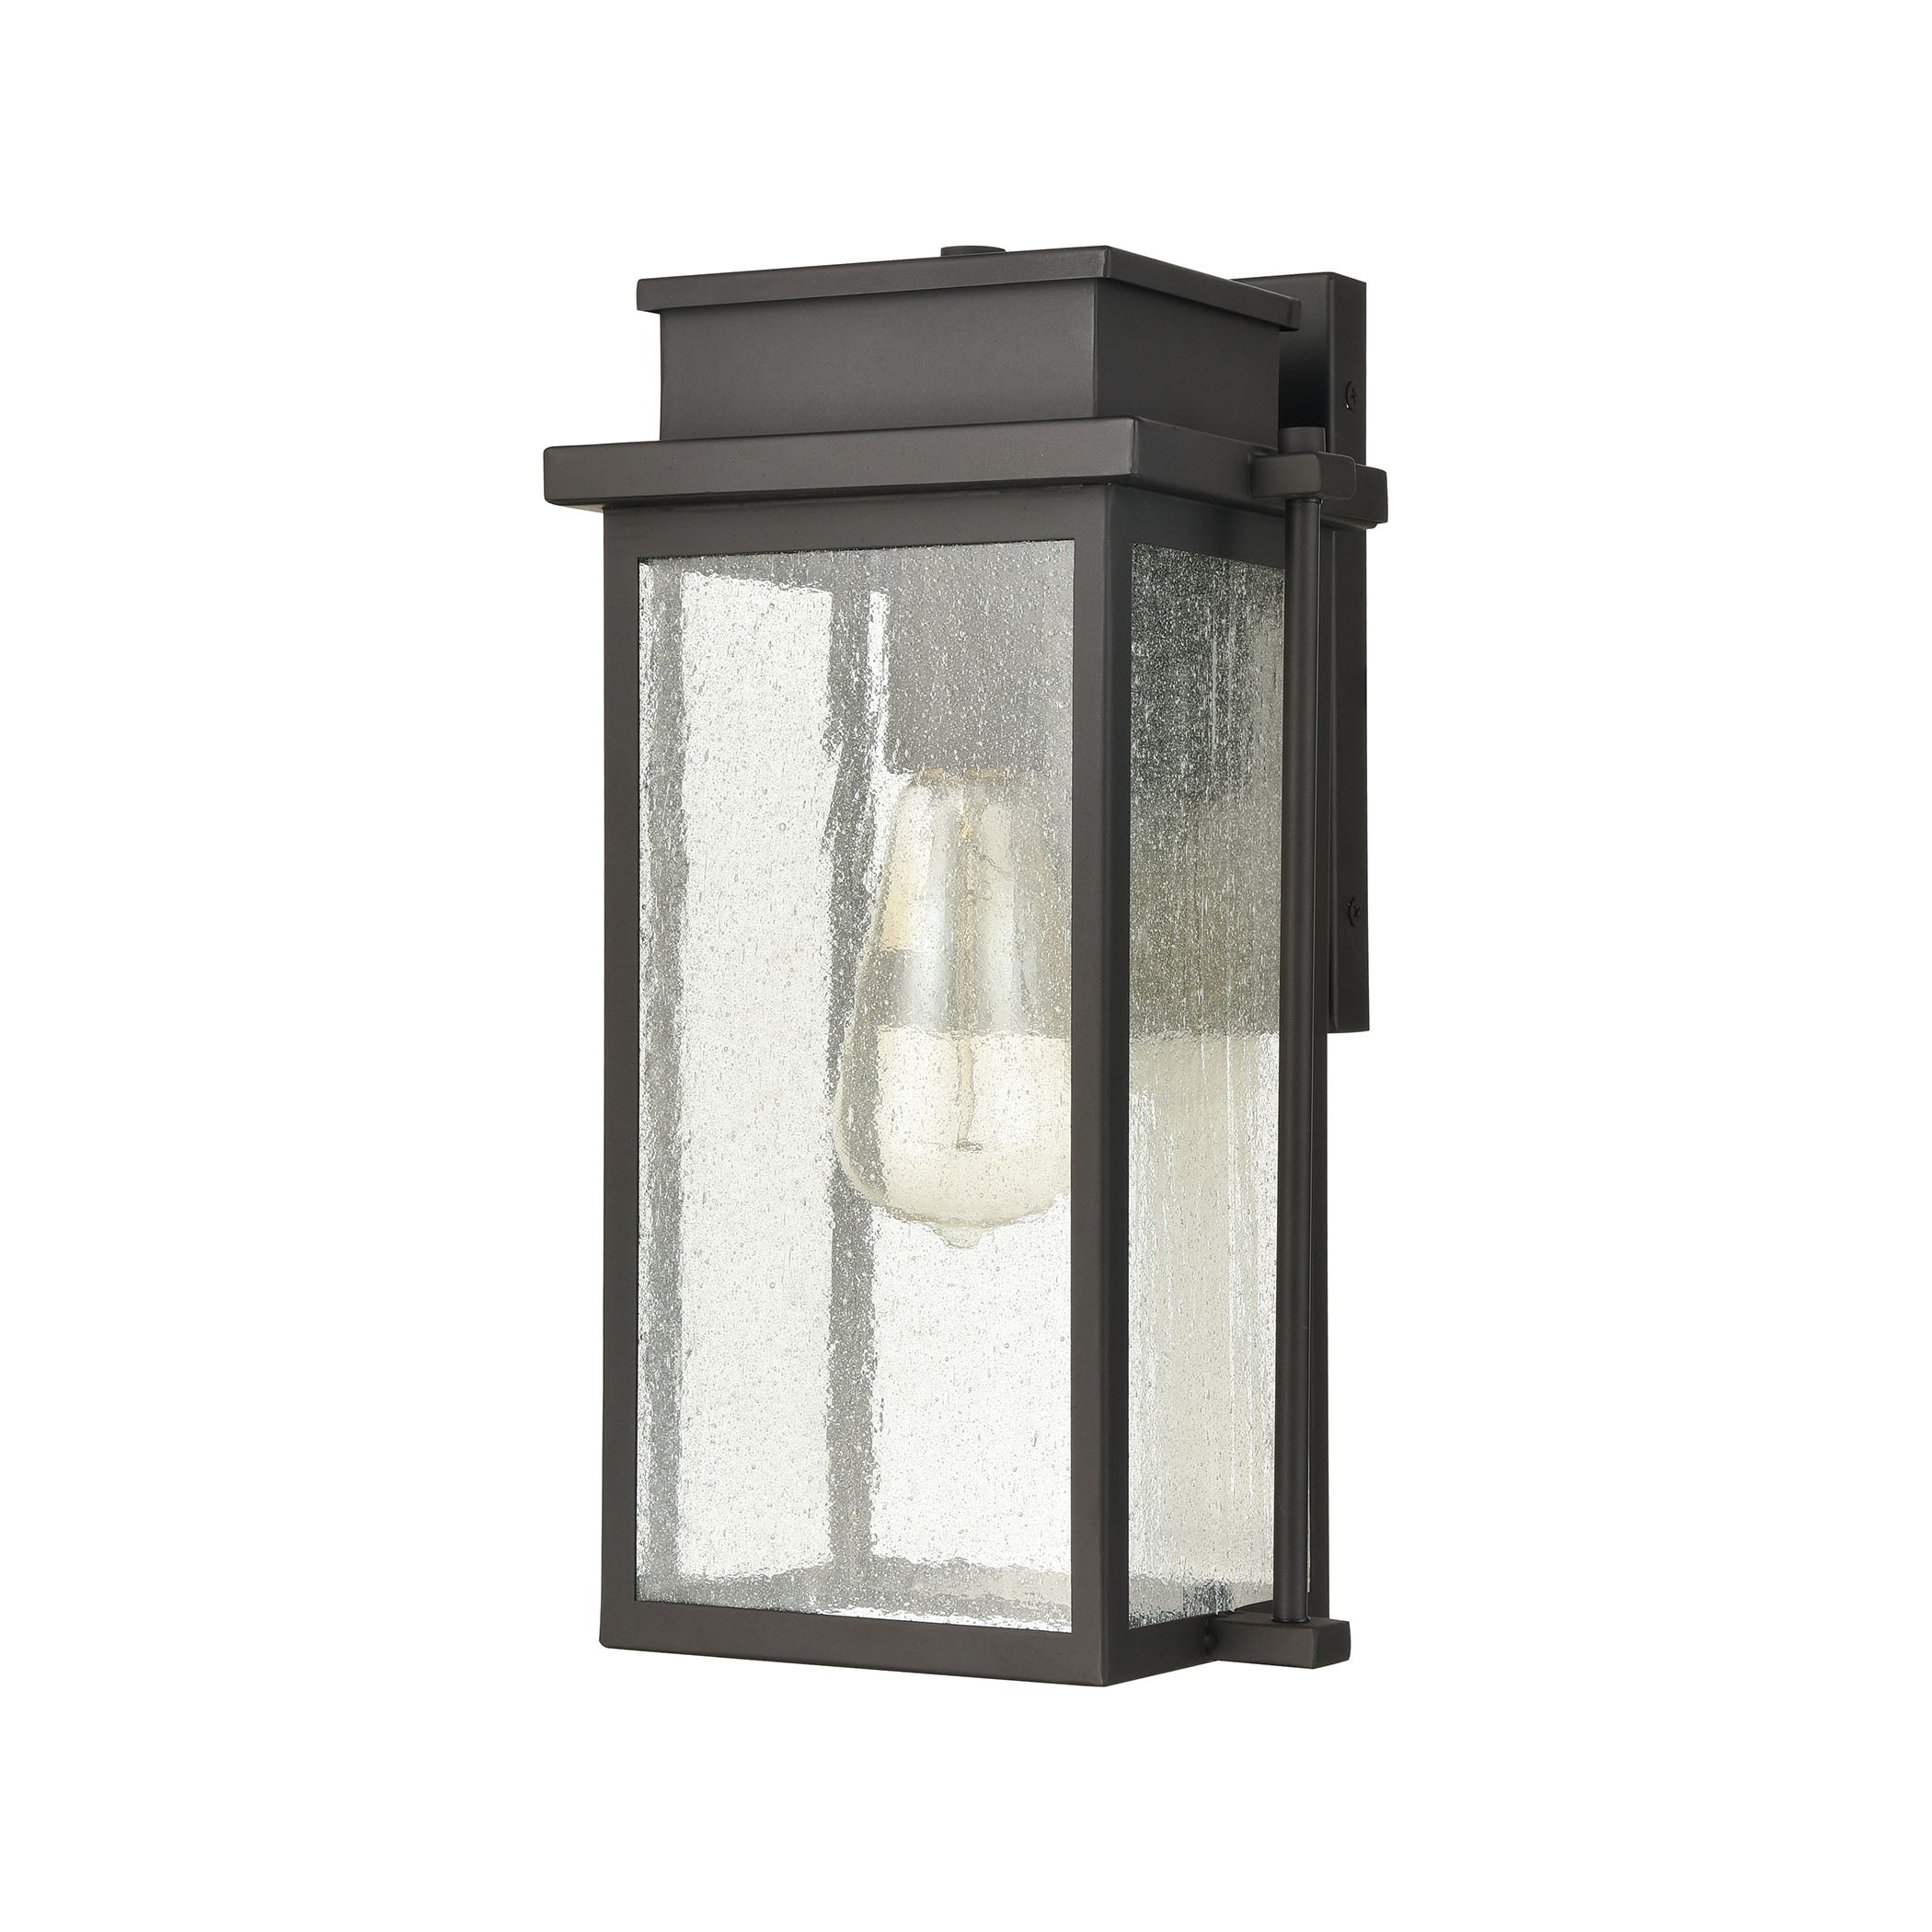 ELK Lighting 45440/1 Braddock 1-Light Outdoor Sconce in Architectural Bronze with Seedy Glass Enclosure